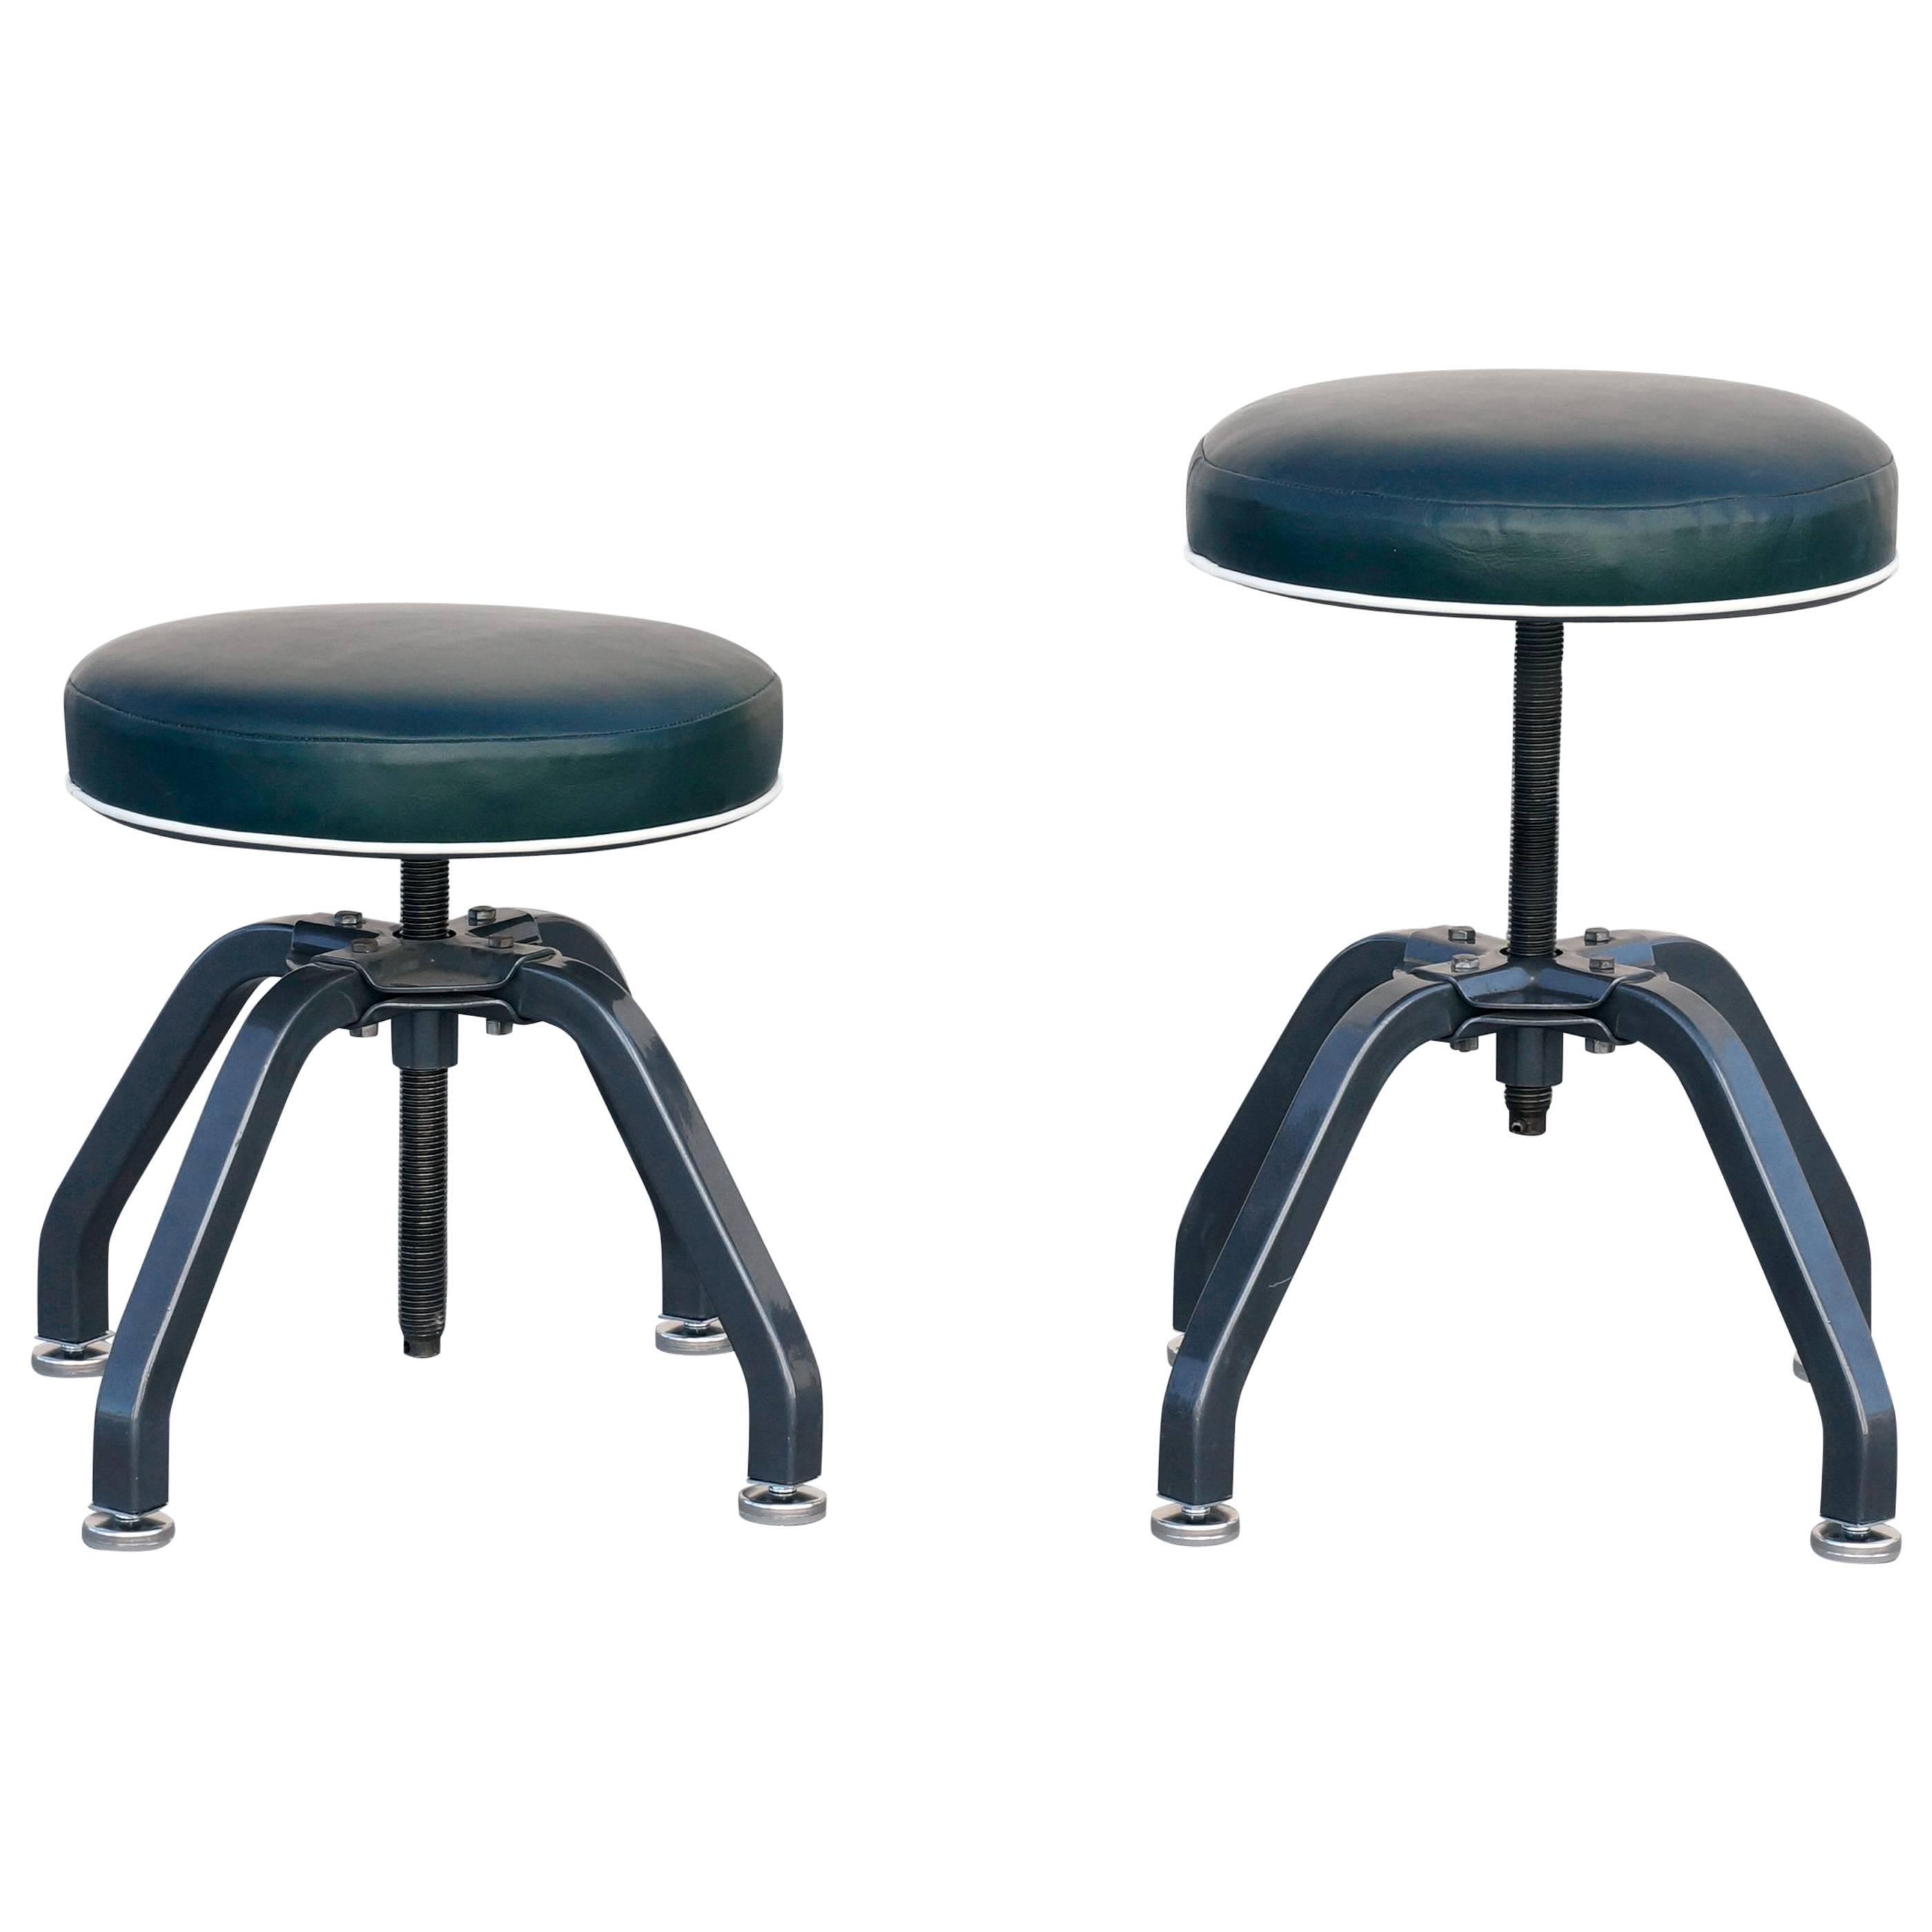 Pair of Rare 1940s Buty-Crafters Salon Stools